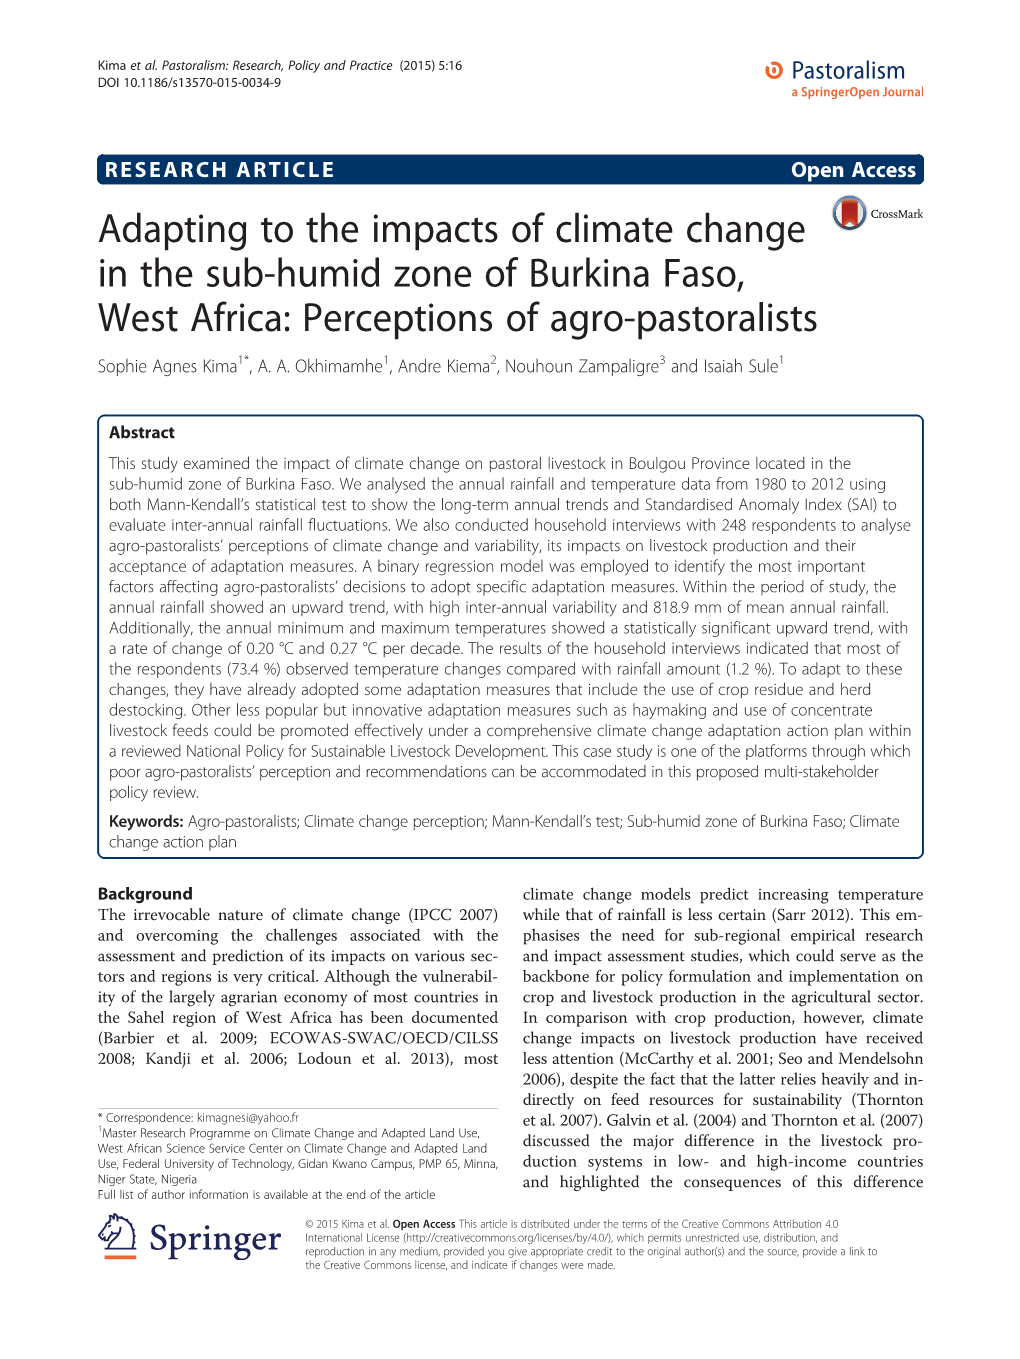 Adapting to the Impacts of Climate Change in the Sub-Humid Zone of Burkina Faso, West Africa: Perceptions of Agro-Pastoralists Sophie Agnes Kima1*, A